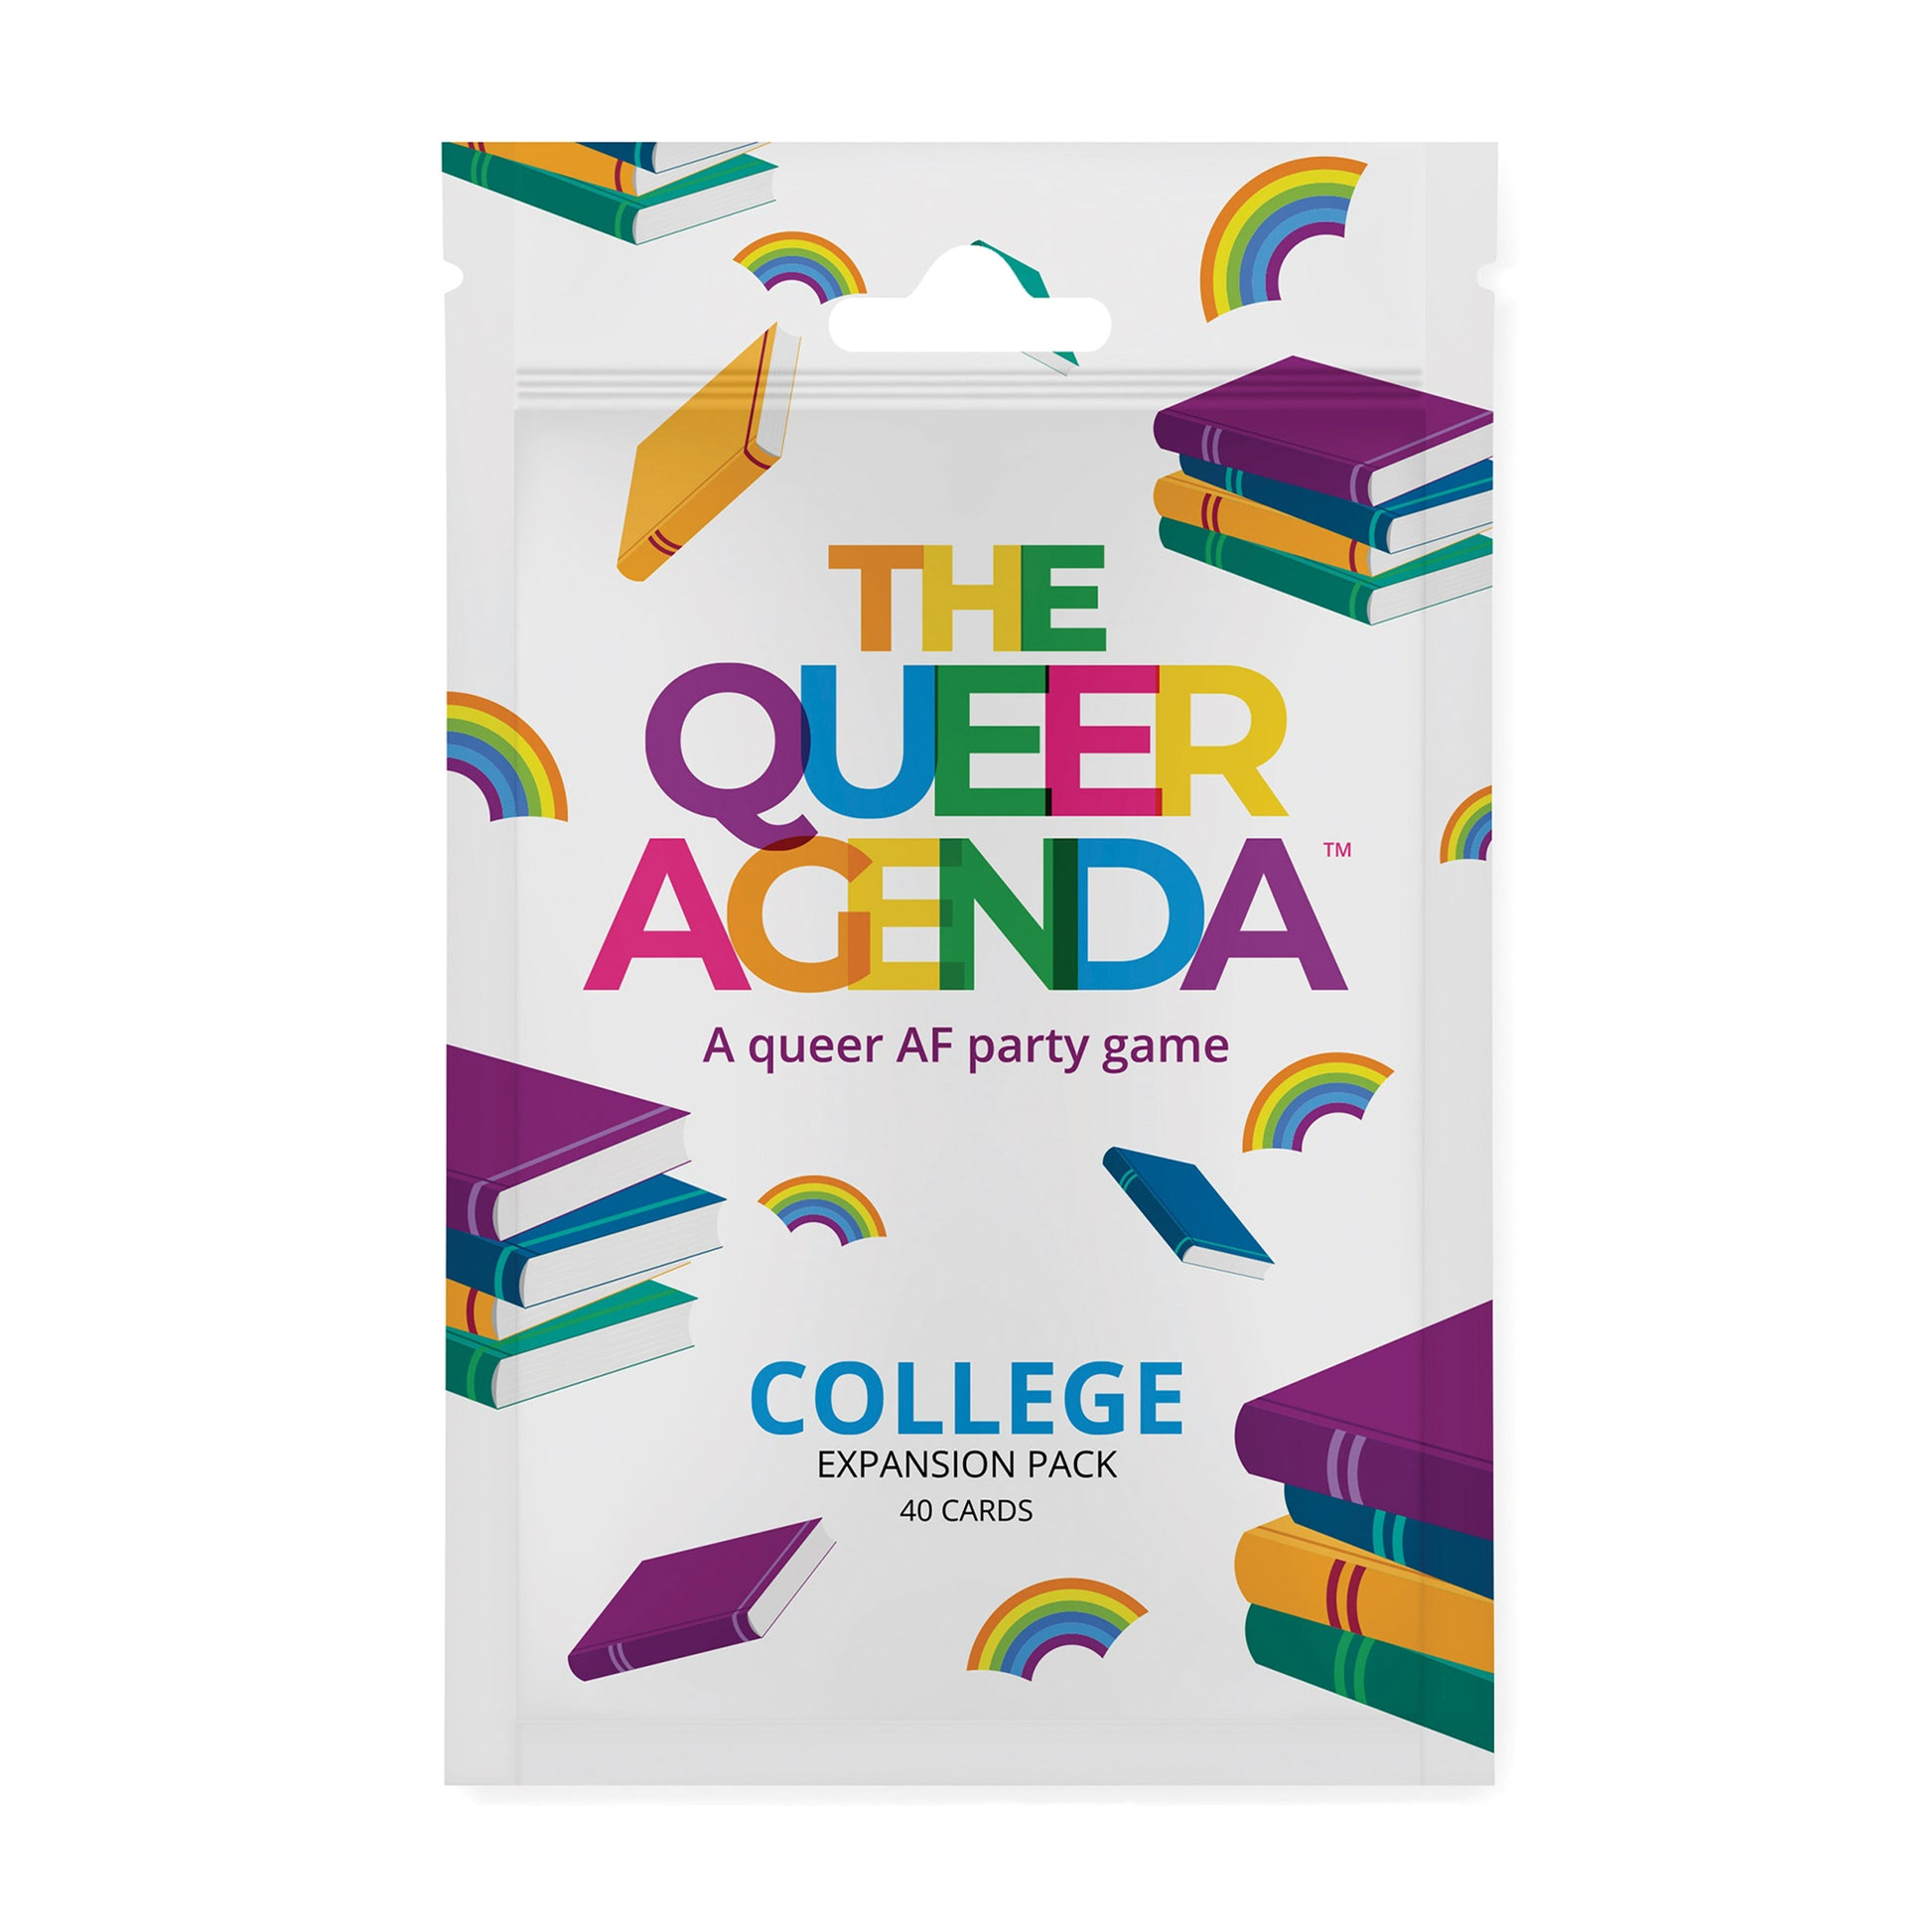 The Queer Agenda College Expansion Pack